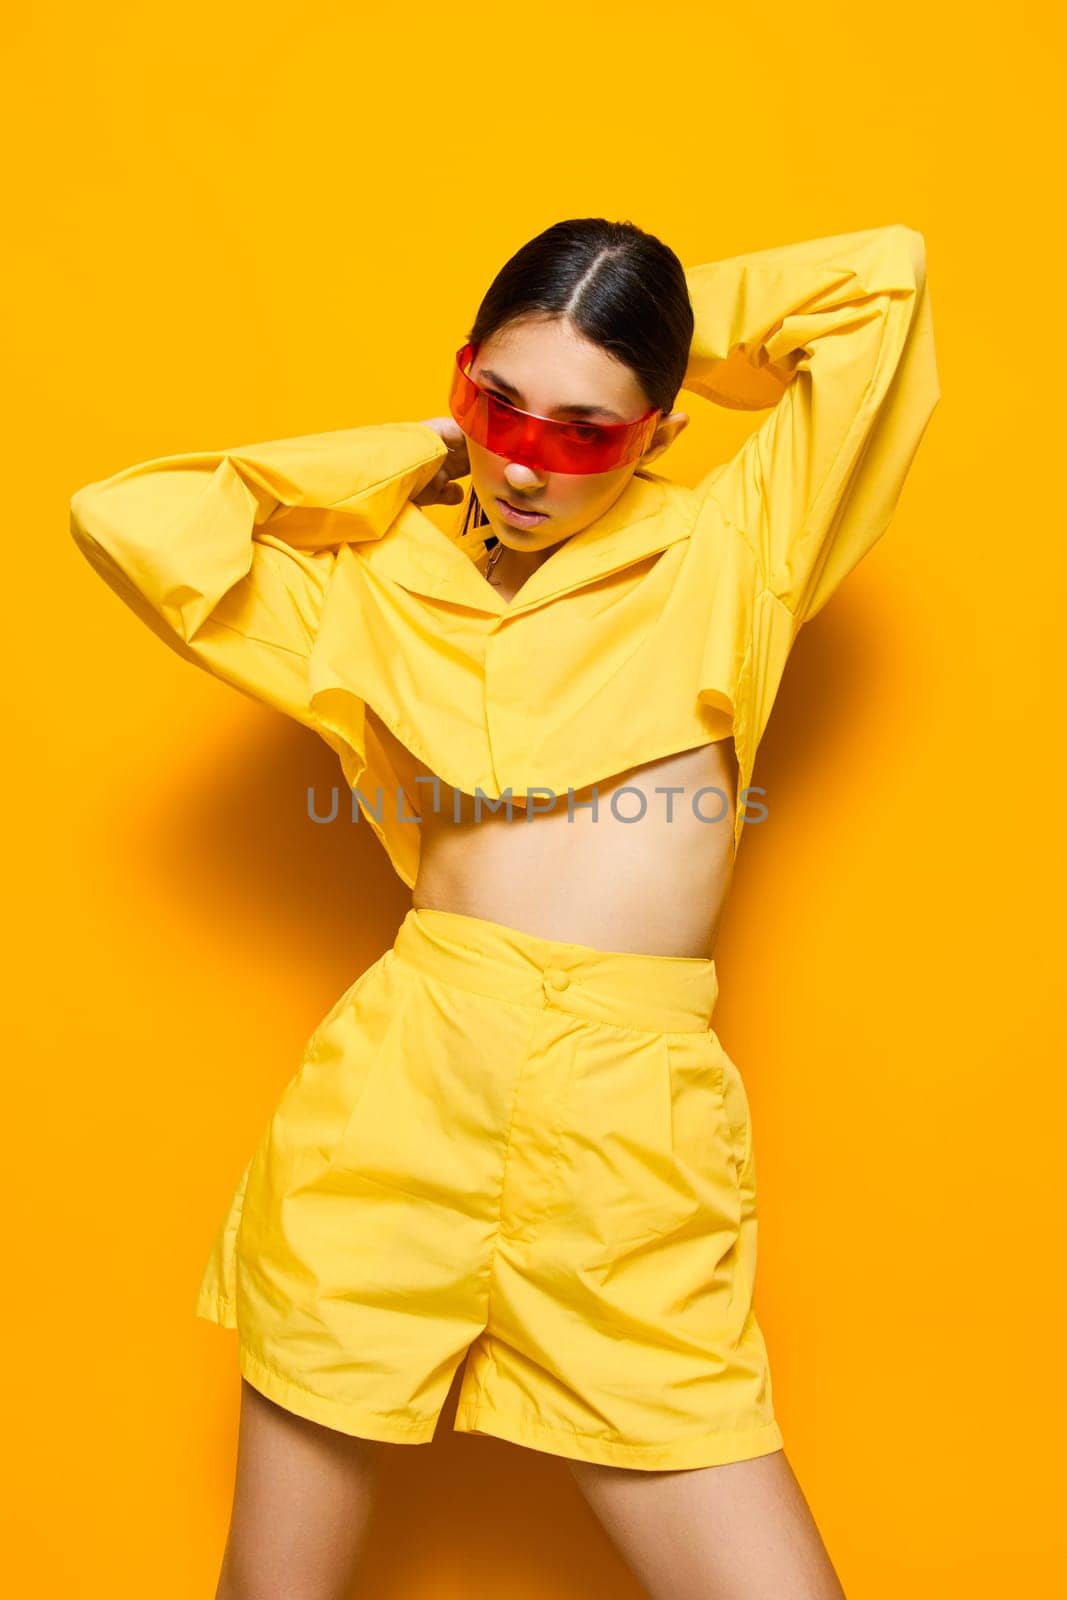 woman hairstyle attractive sunglasses beautiful lifestyle girl yellow young trendy fashion by SHOTPRIME